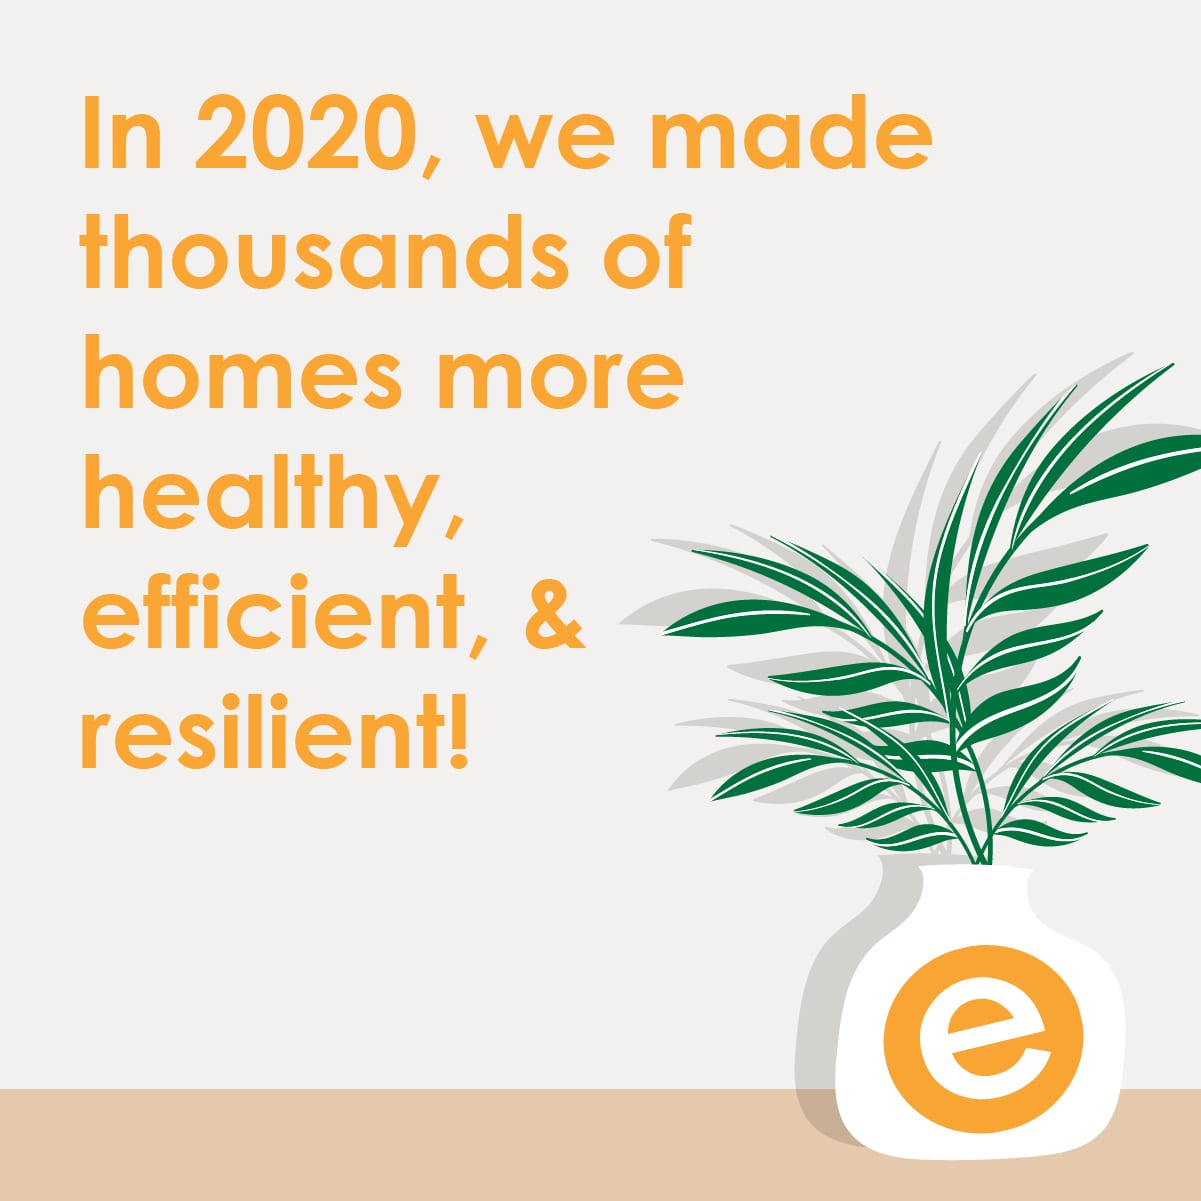 In 2020, we made thousands of homes more healthy, efficient, and resilient